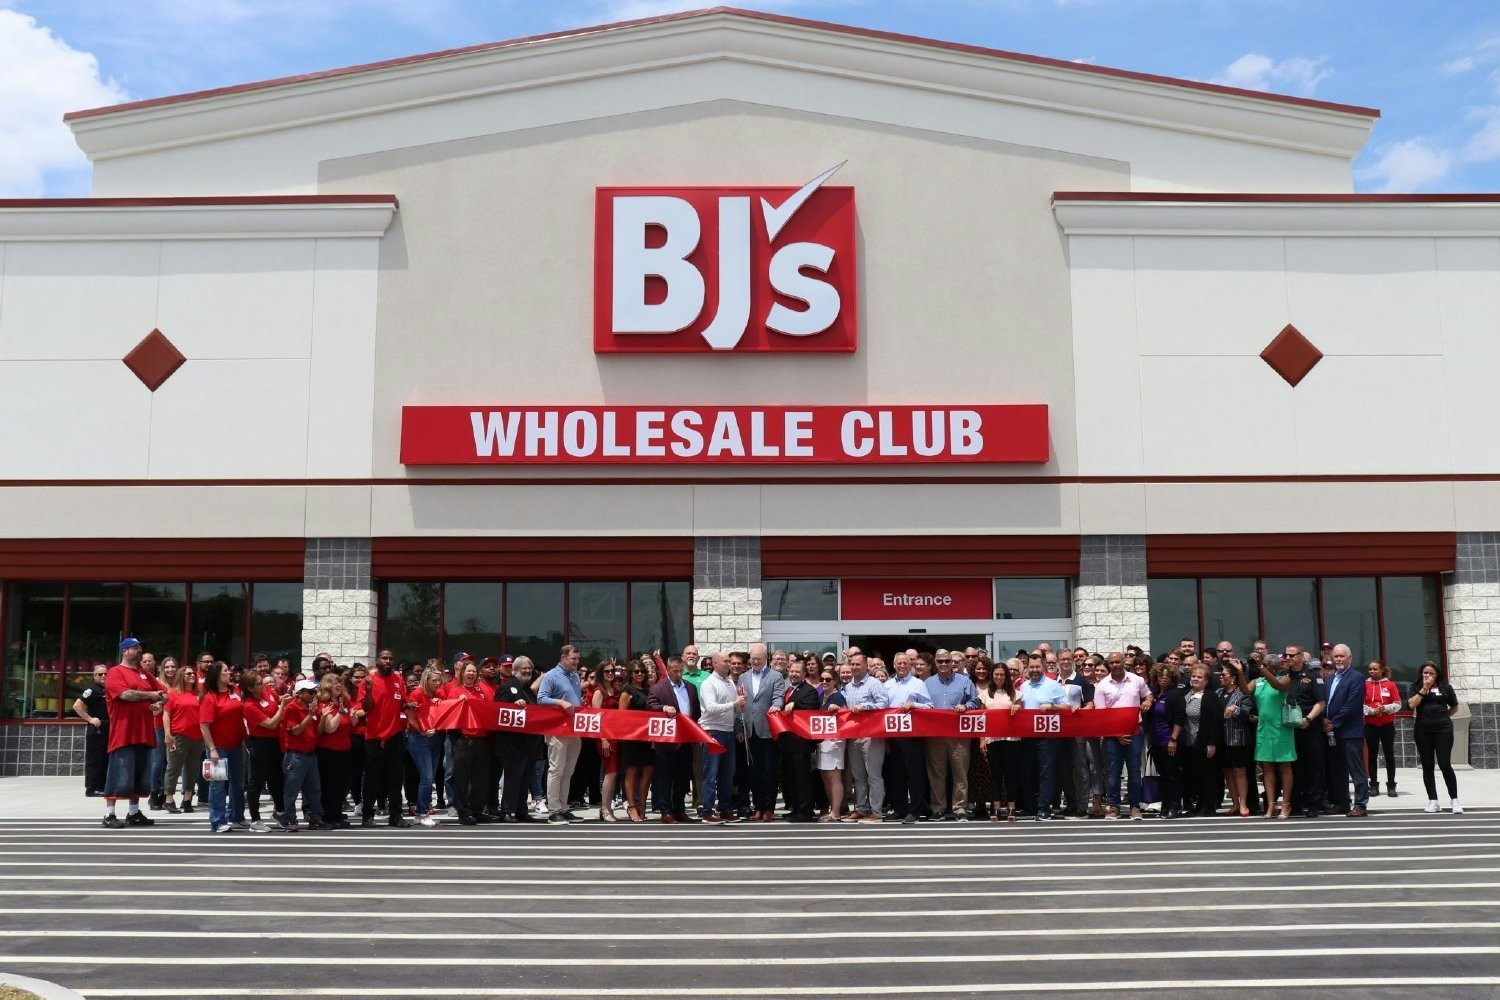 BJ's CEO, leadership, club team members and local community officials hold a ribbon-cutting ceremony for our new club.